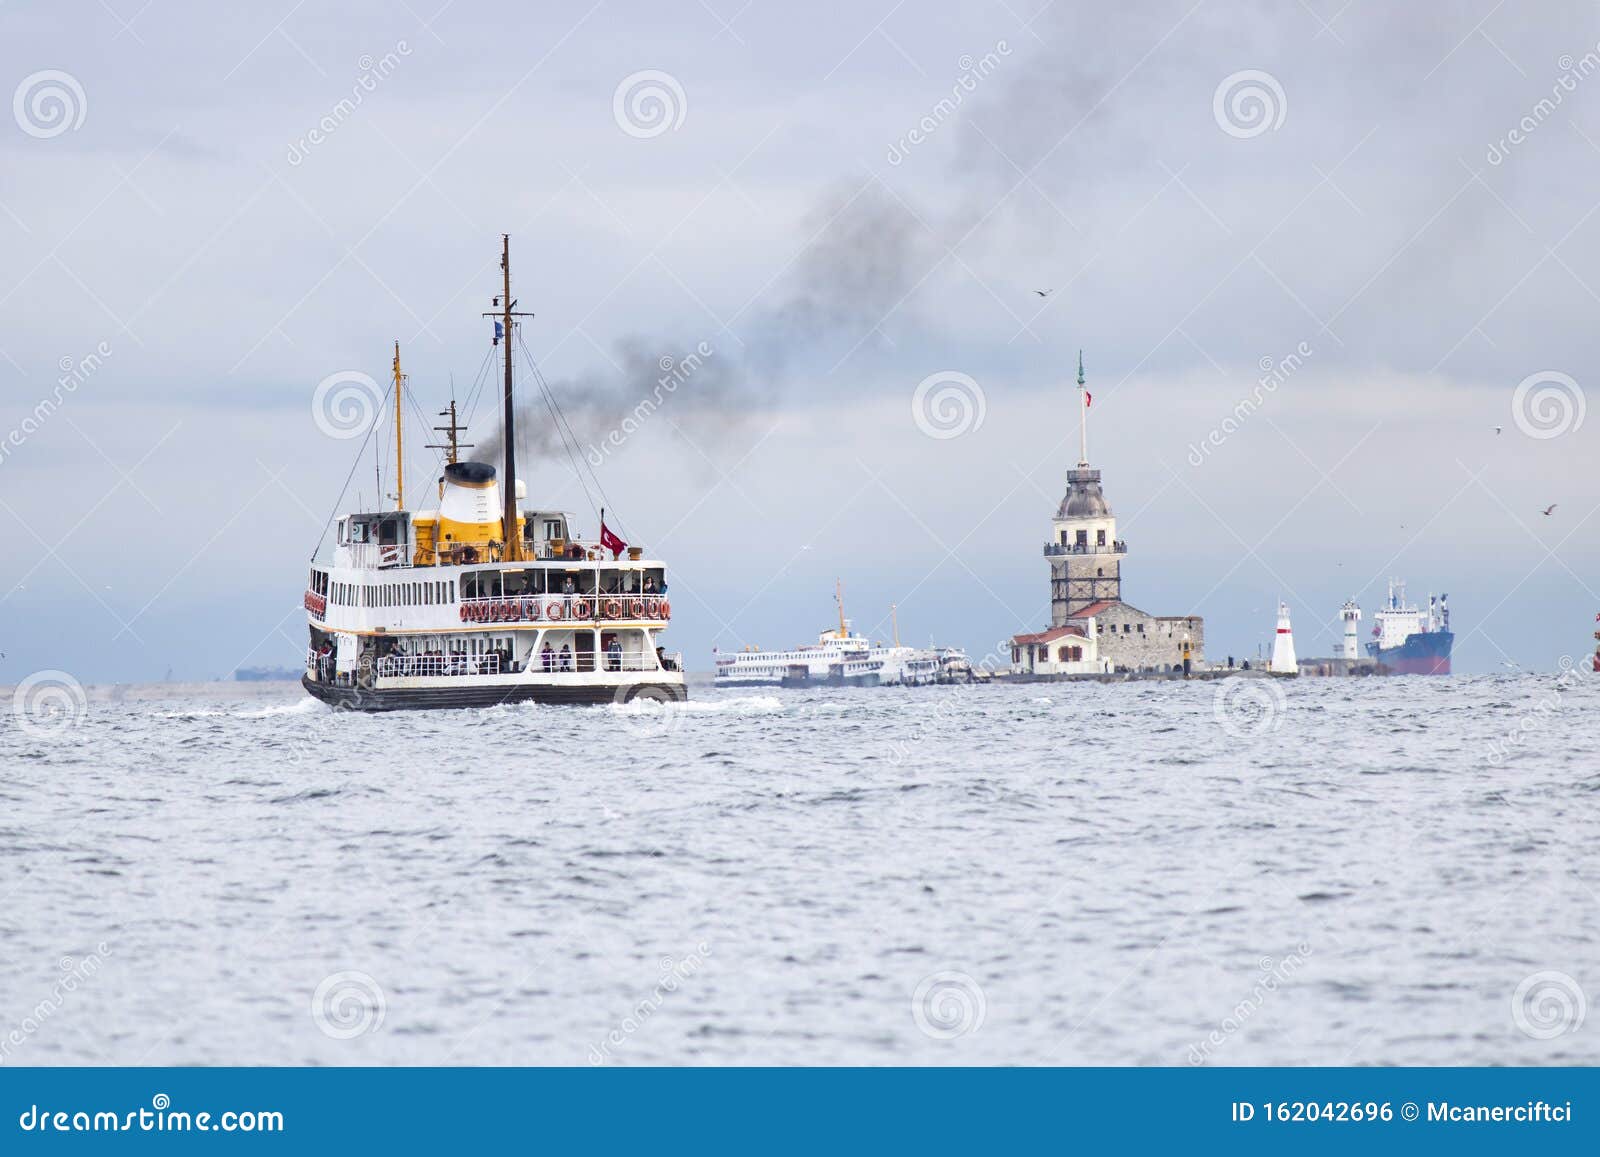 in istanbul, ferries operate on the bosphorus line. traditional old steamers. cloud weather in the background and the anatolian